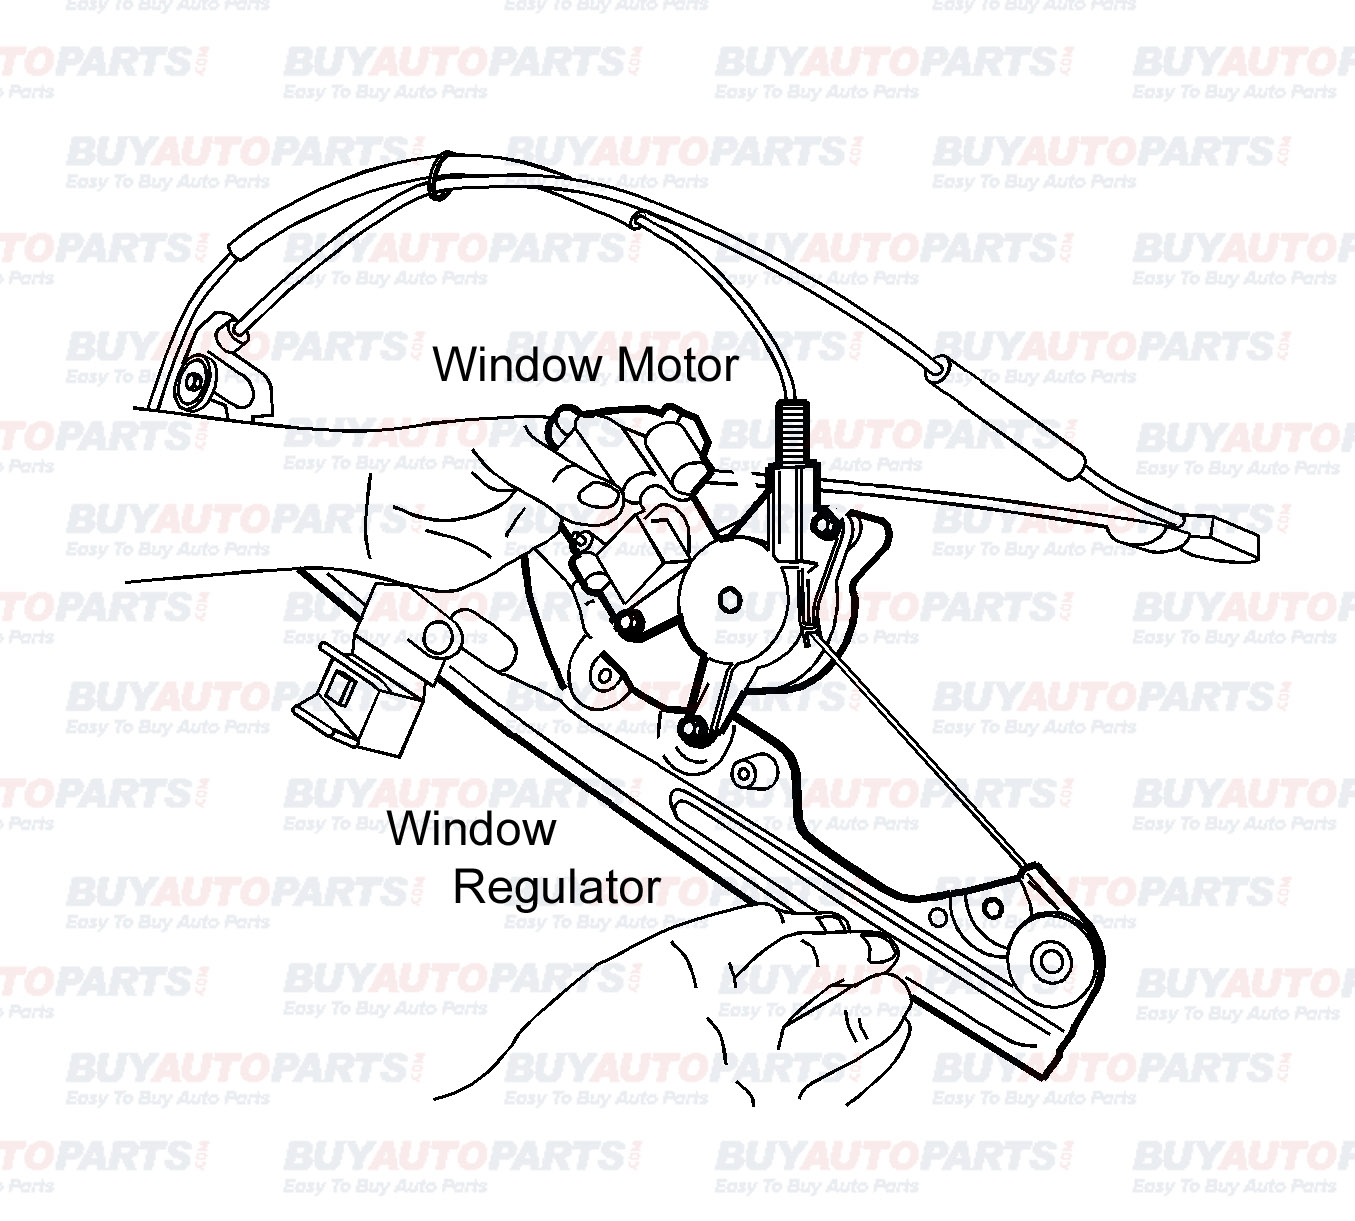 What Does a Window Regulator Do?